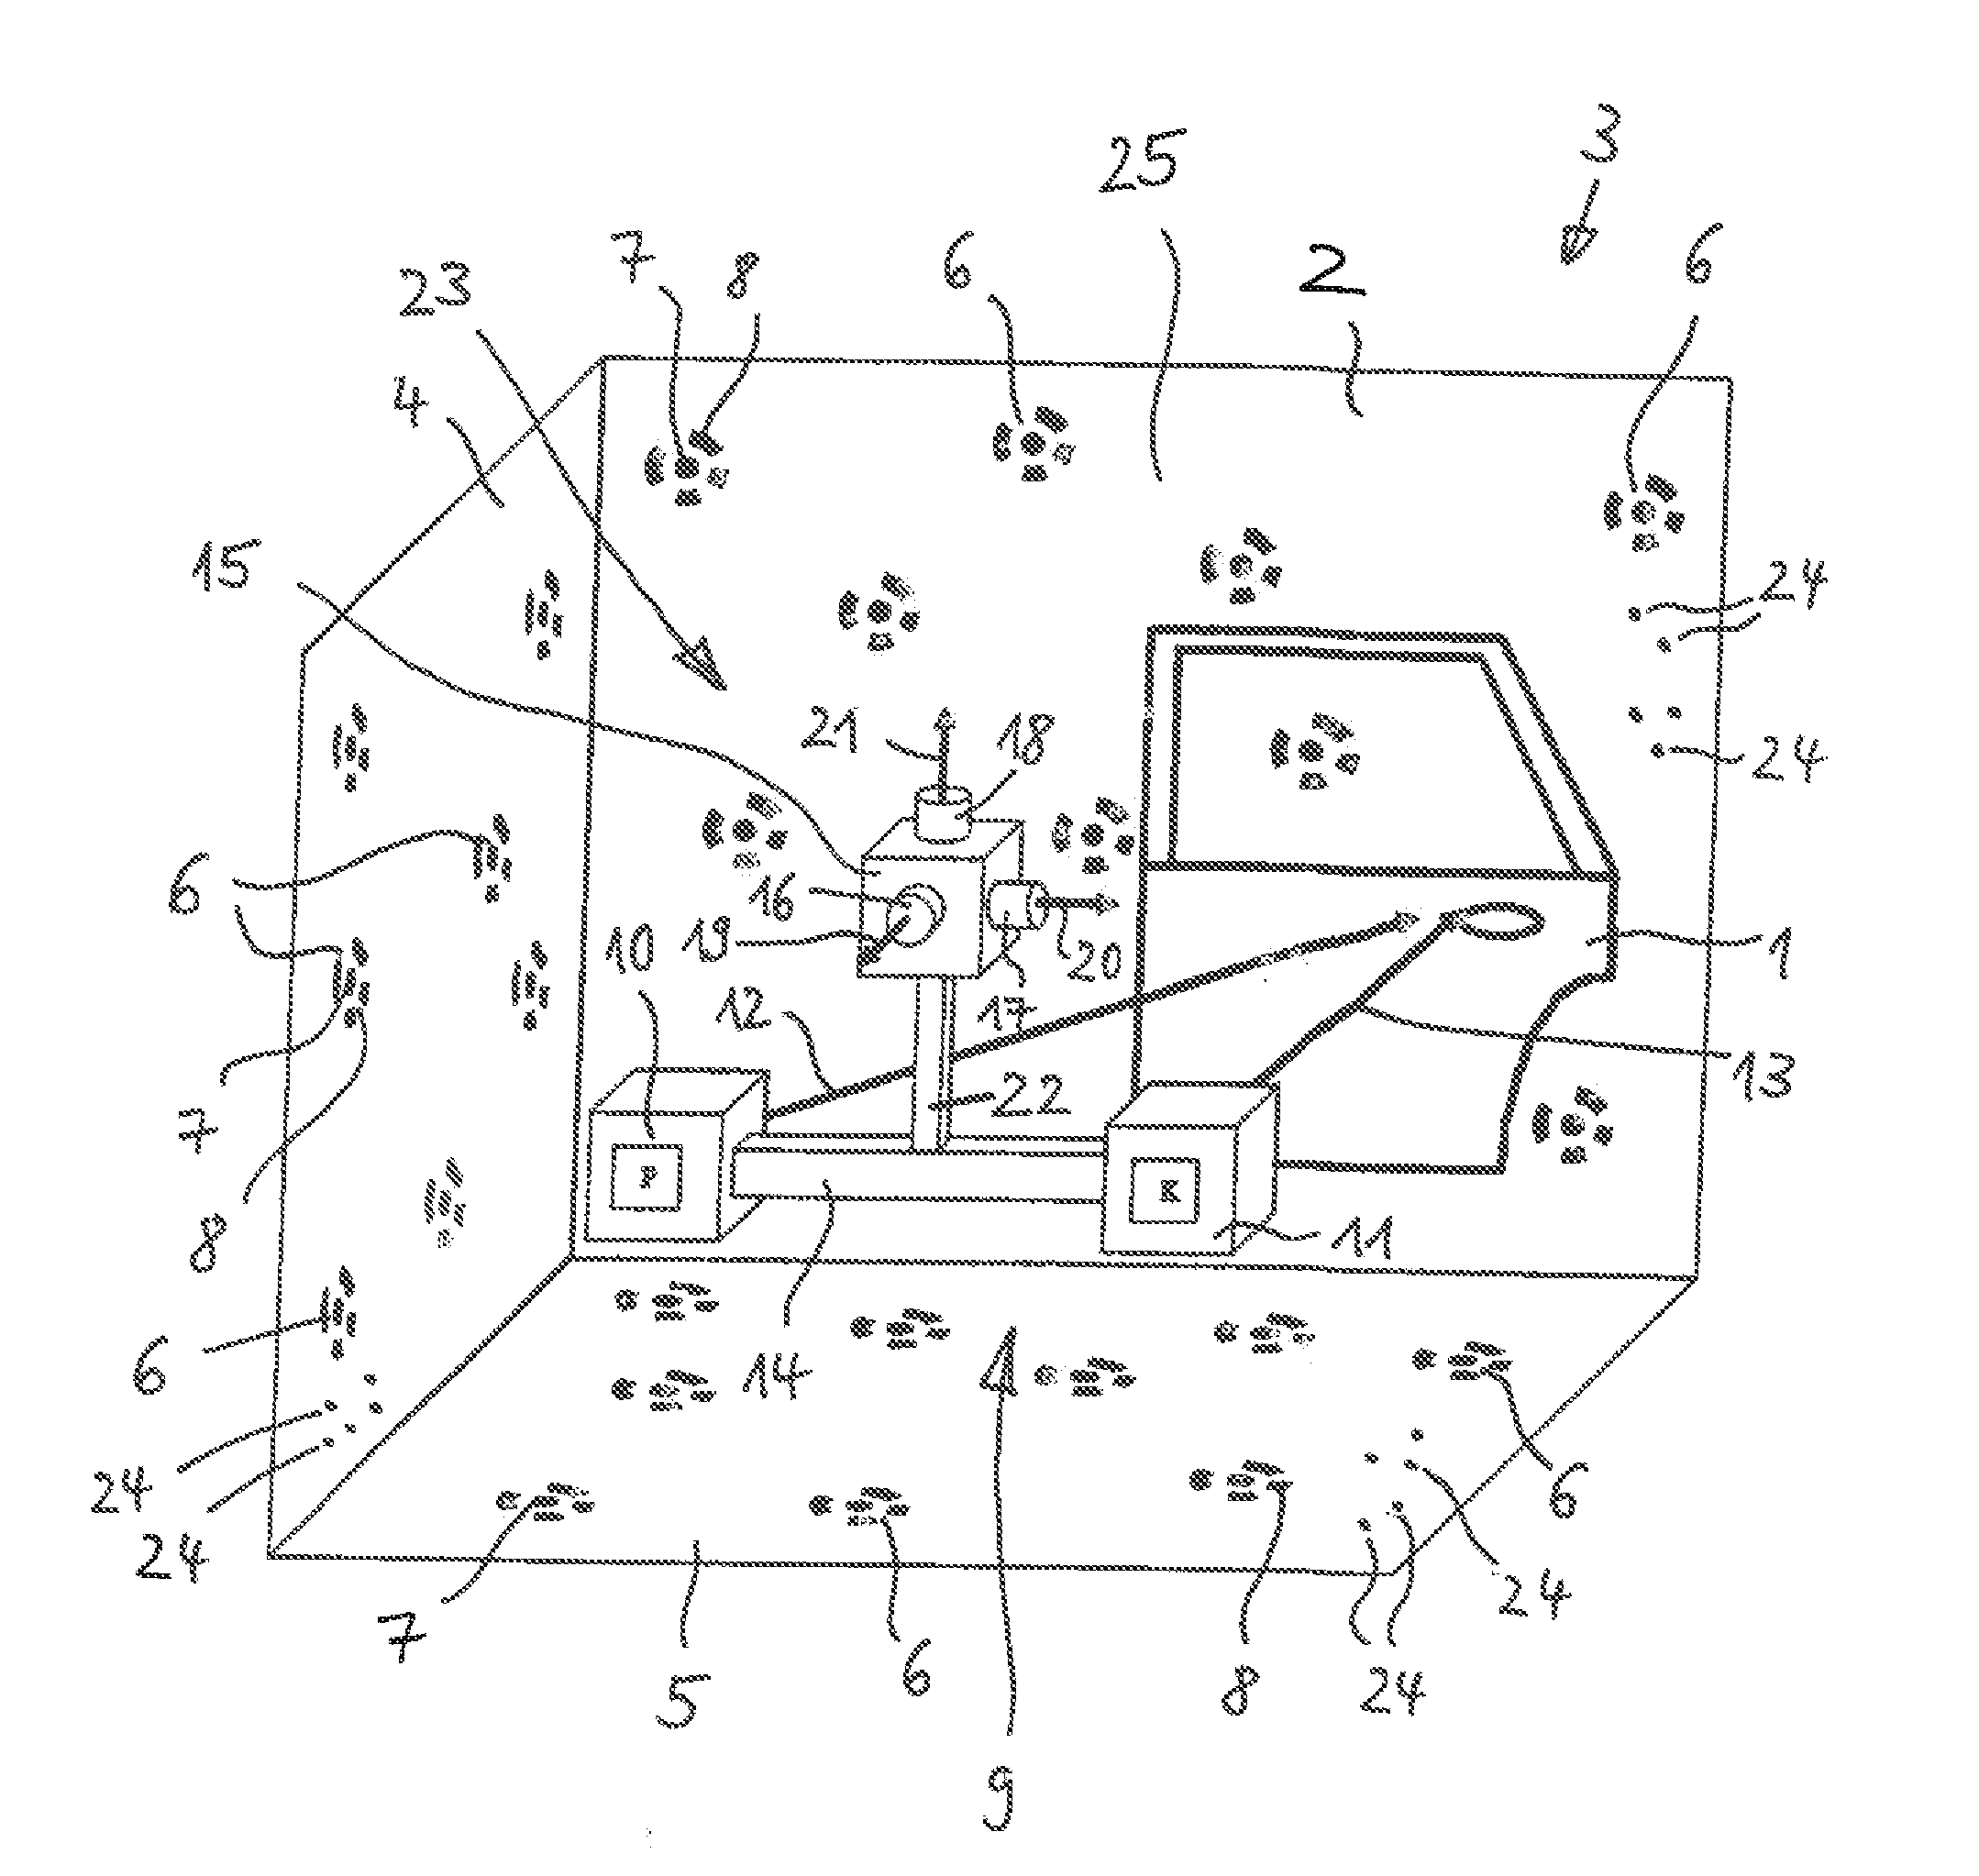 Apparatus and method for determining the 3D coordinates of an object and for calibrating an industrial robot